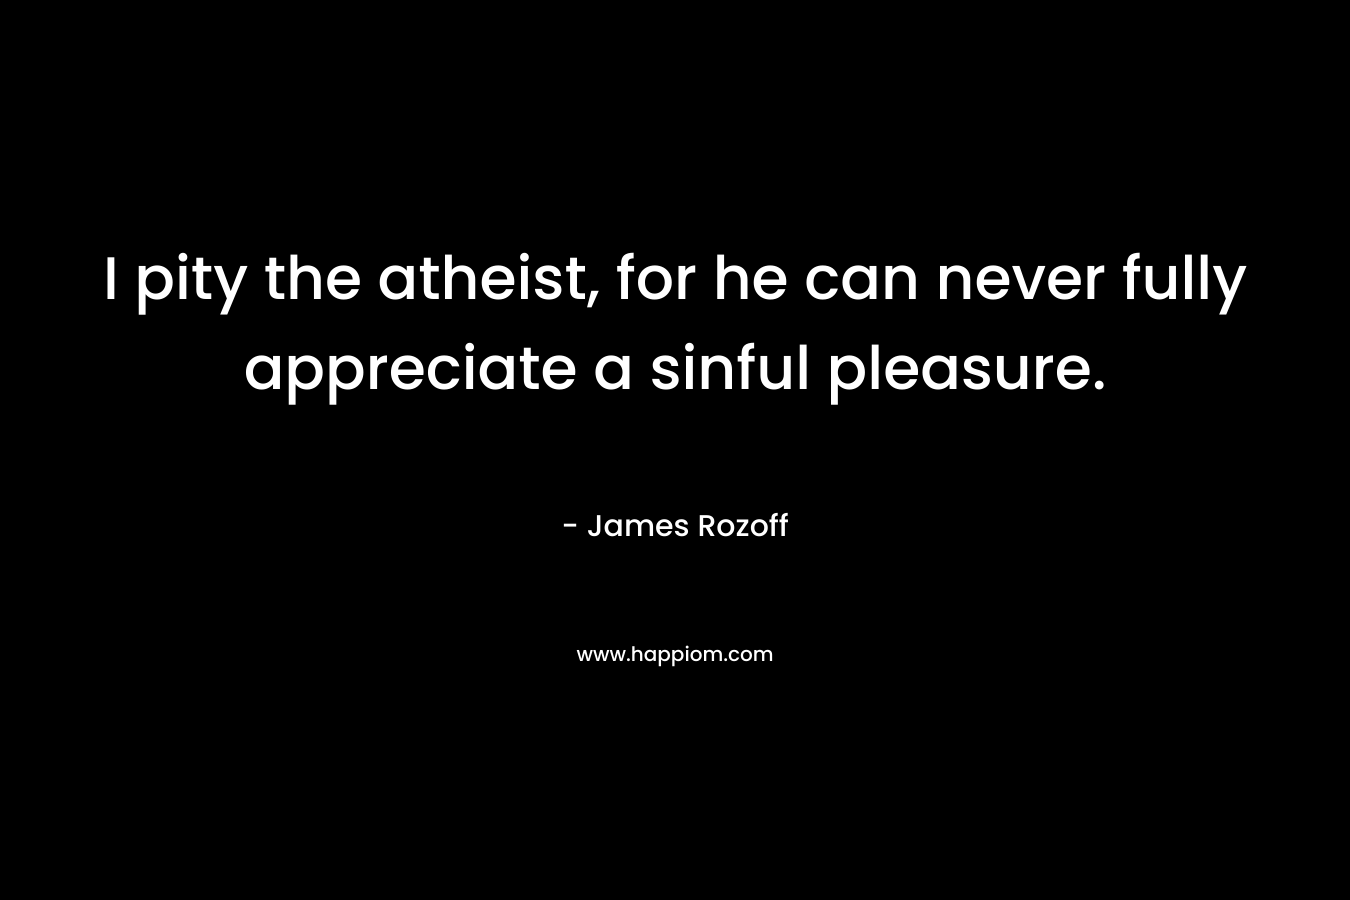 I pity the atheist, for he can never fully appreciate a sinful pleasure.